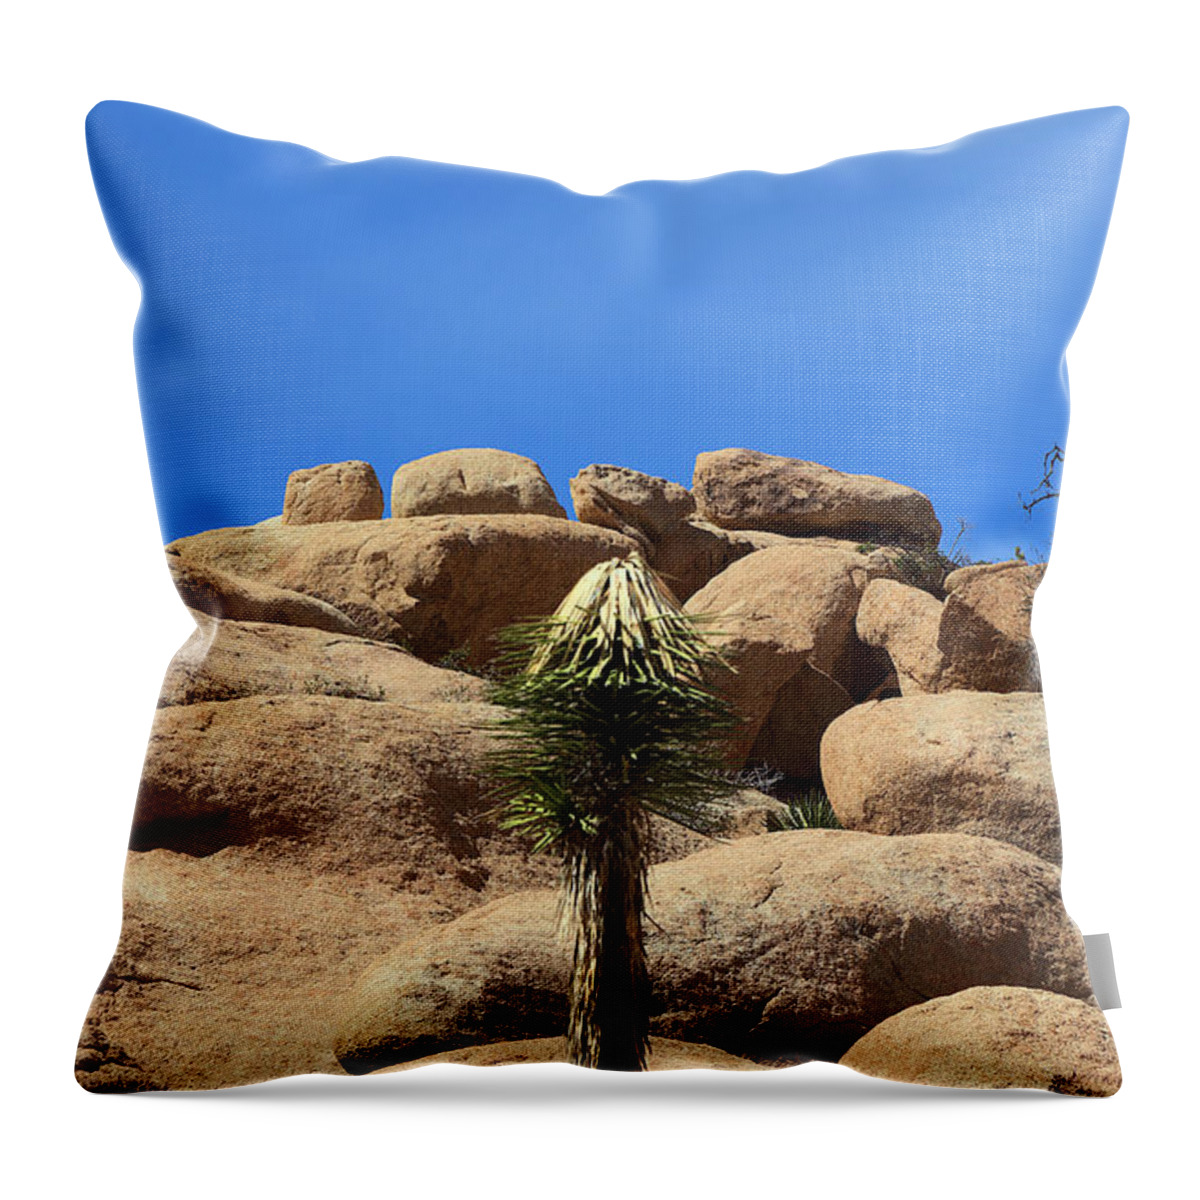 Like A Rocket Throw Pillow featuring the photograph Like a Rocket by Viktor Savchenko